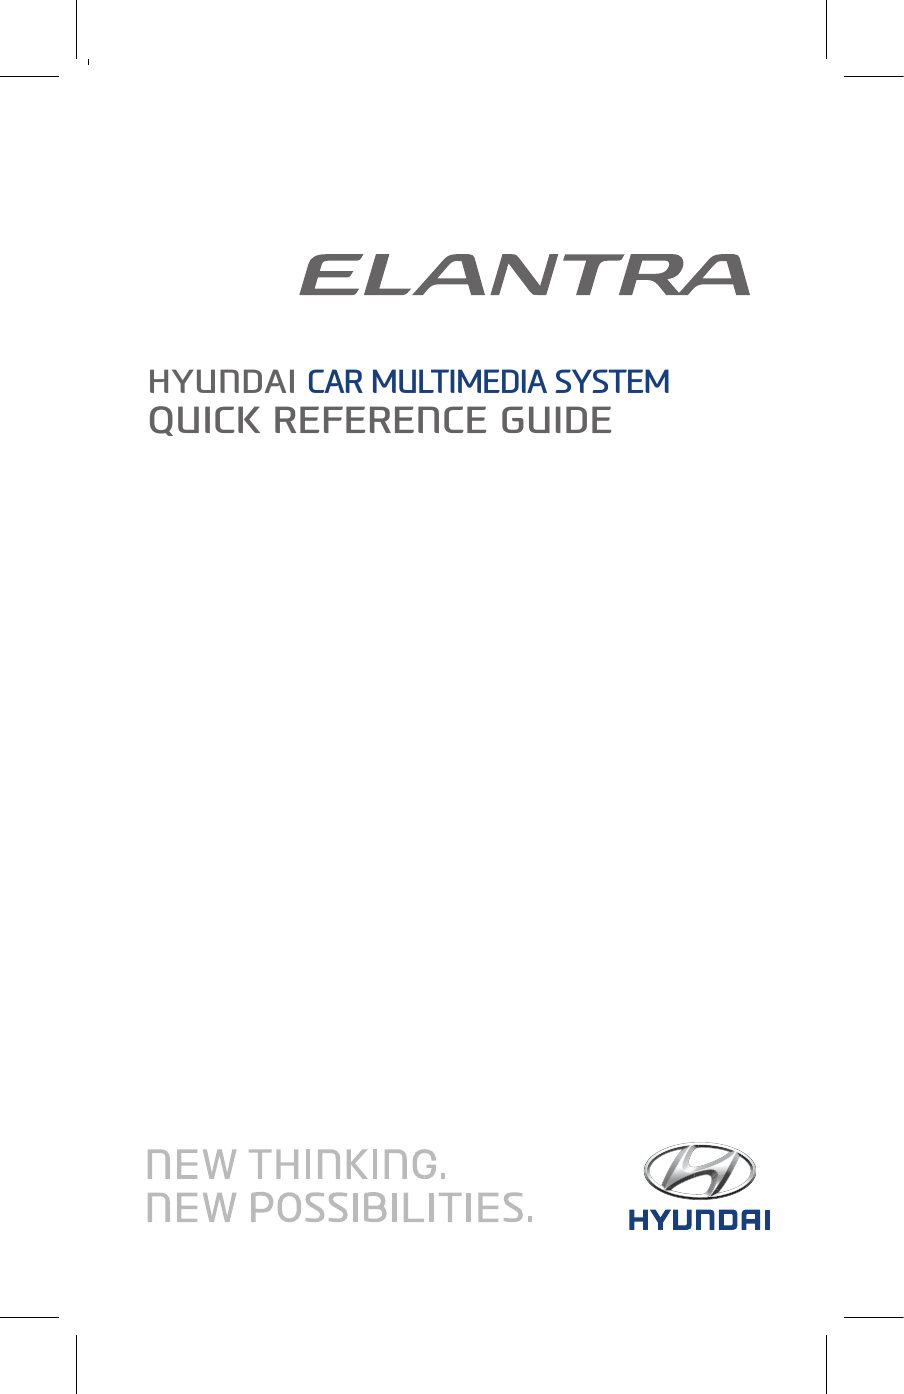 HYUNDAI CAR MULTIMEDIA SYSTEMQUICK REFERENCE GUIDE